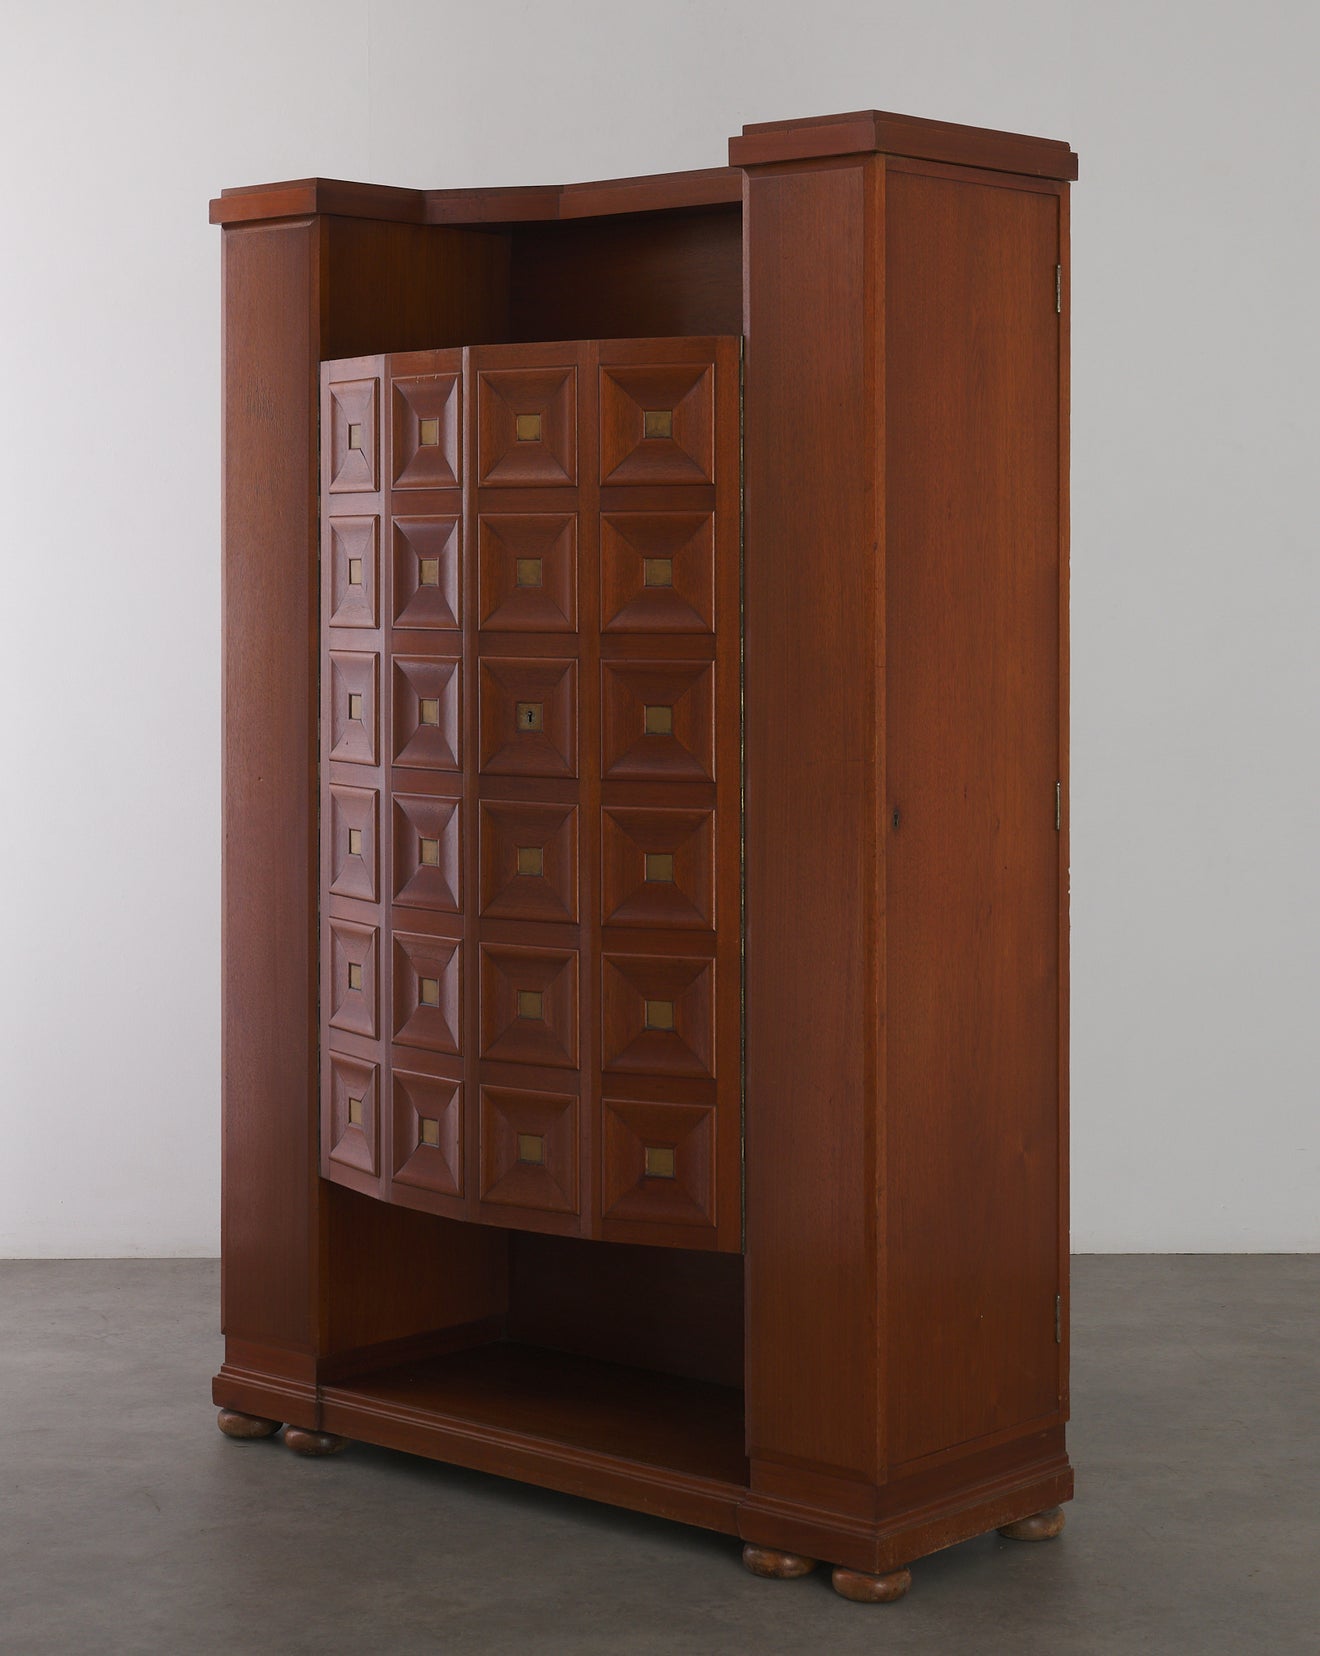 GERMAN CABINET WITH GEOMETRIC PANELING DESIGN